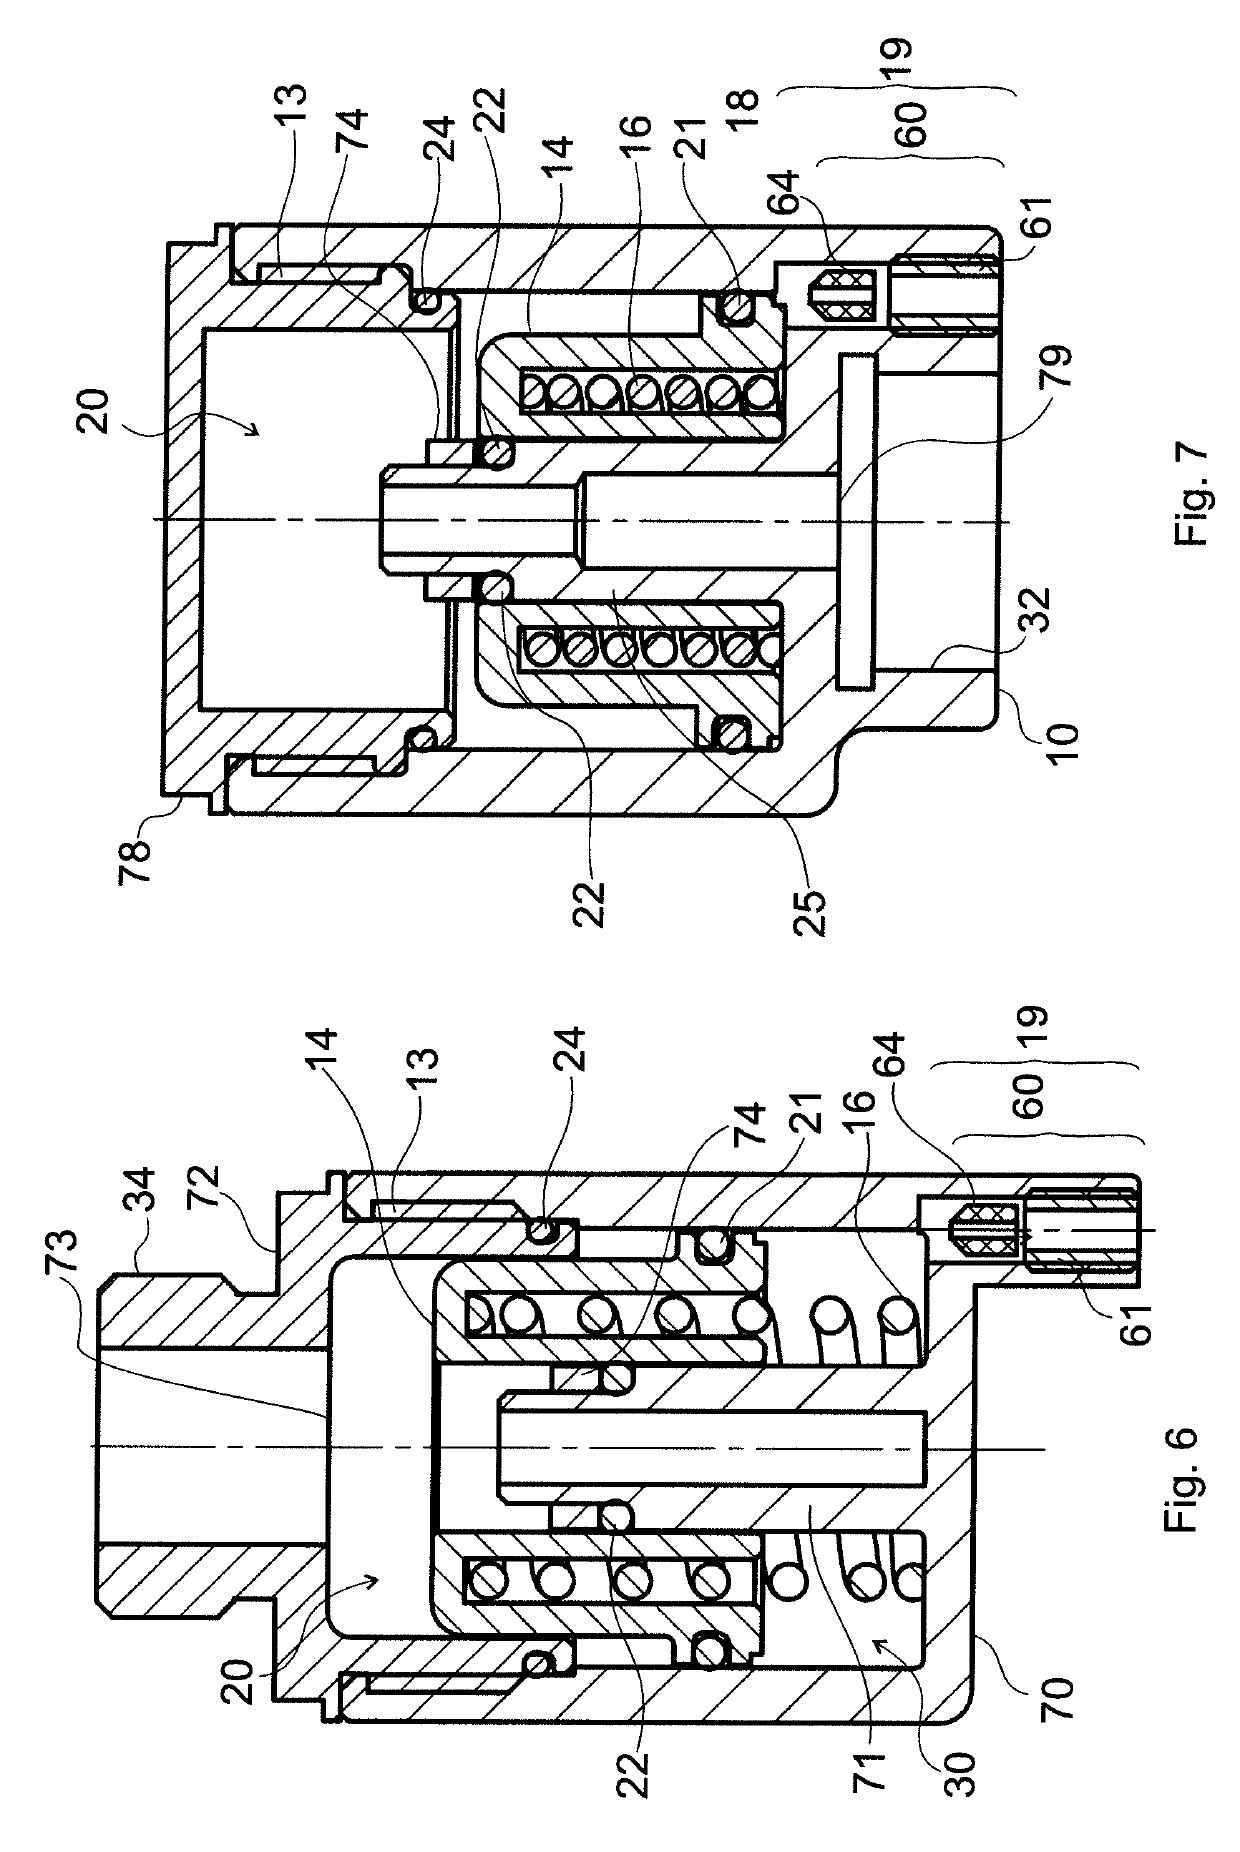 Device For Reducing Pressure Surge